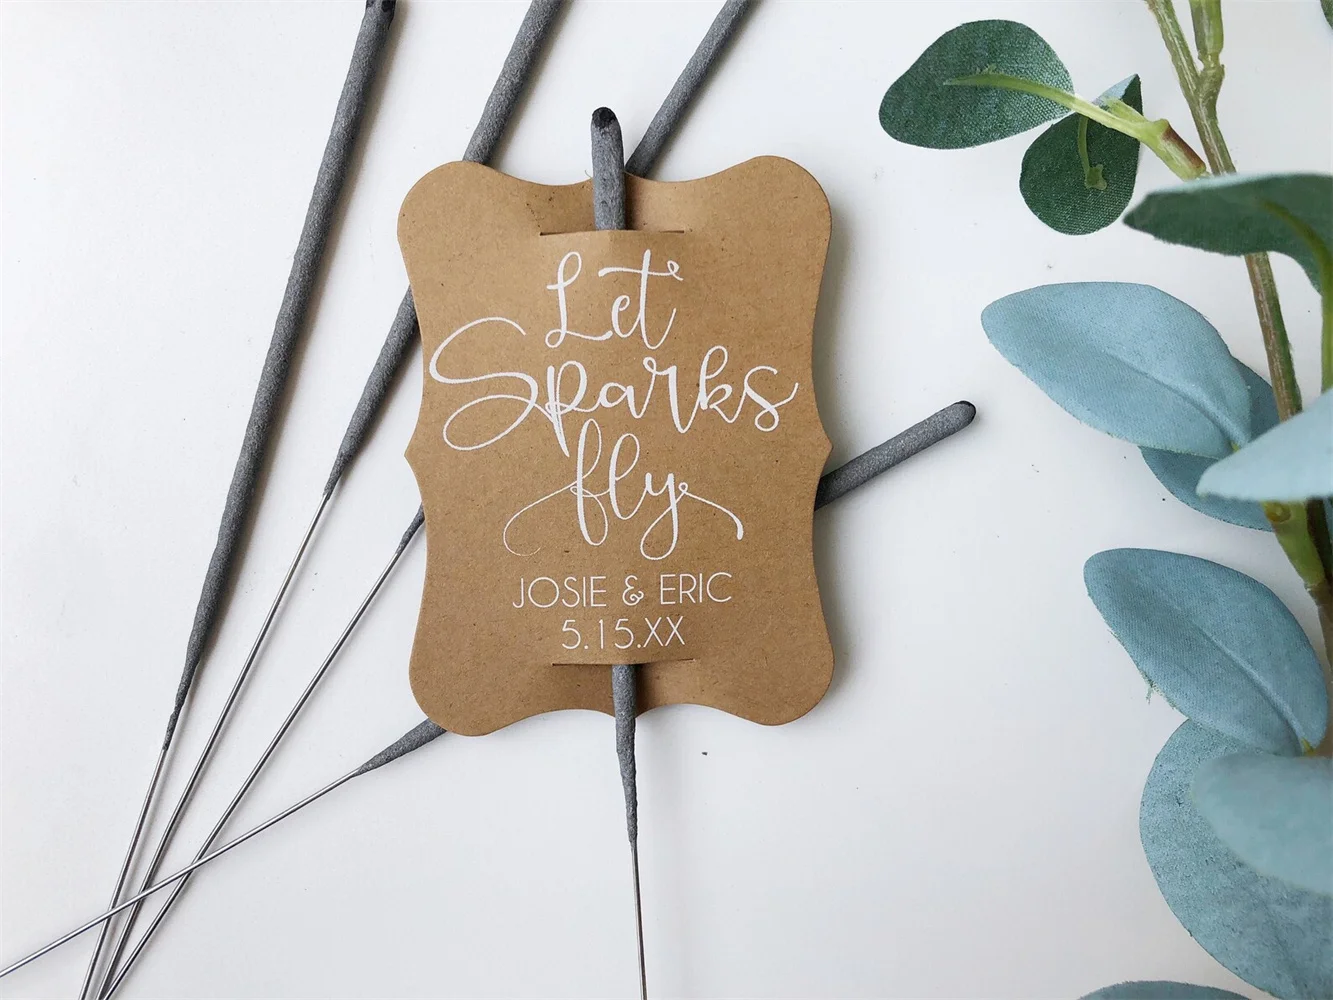 

50 Let Sparks Fly Sparkler tags, Perfect for your wedding reception sparkler send off, personalized with your names and date,